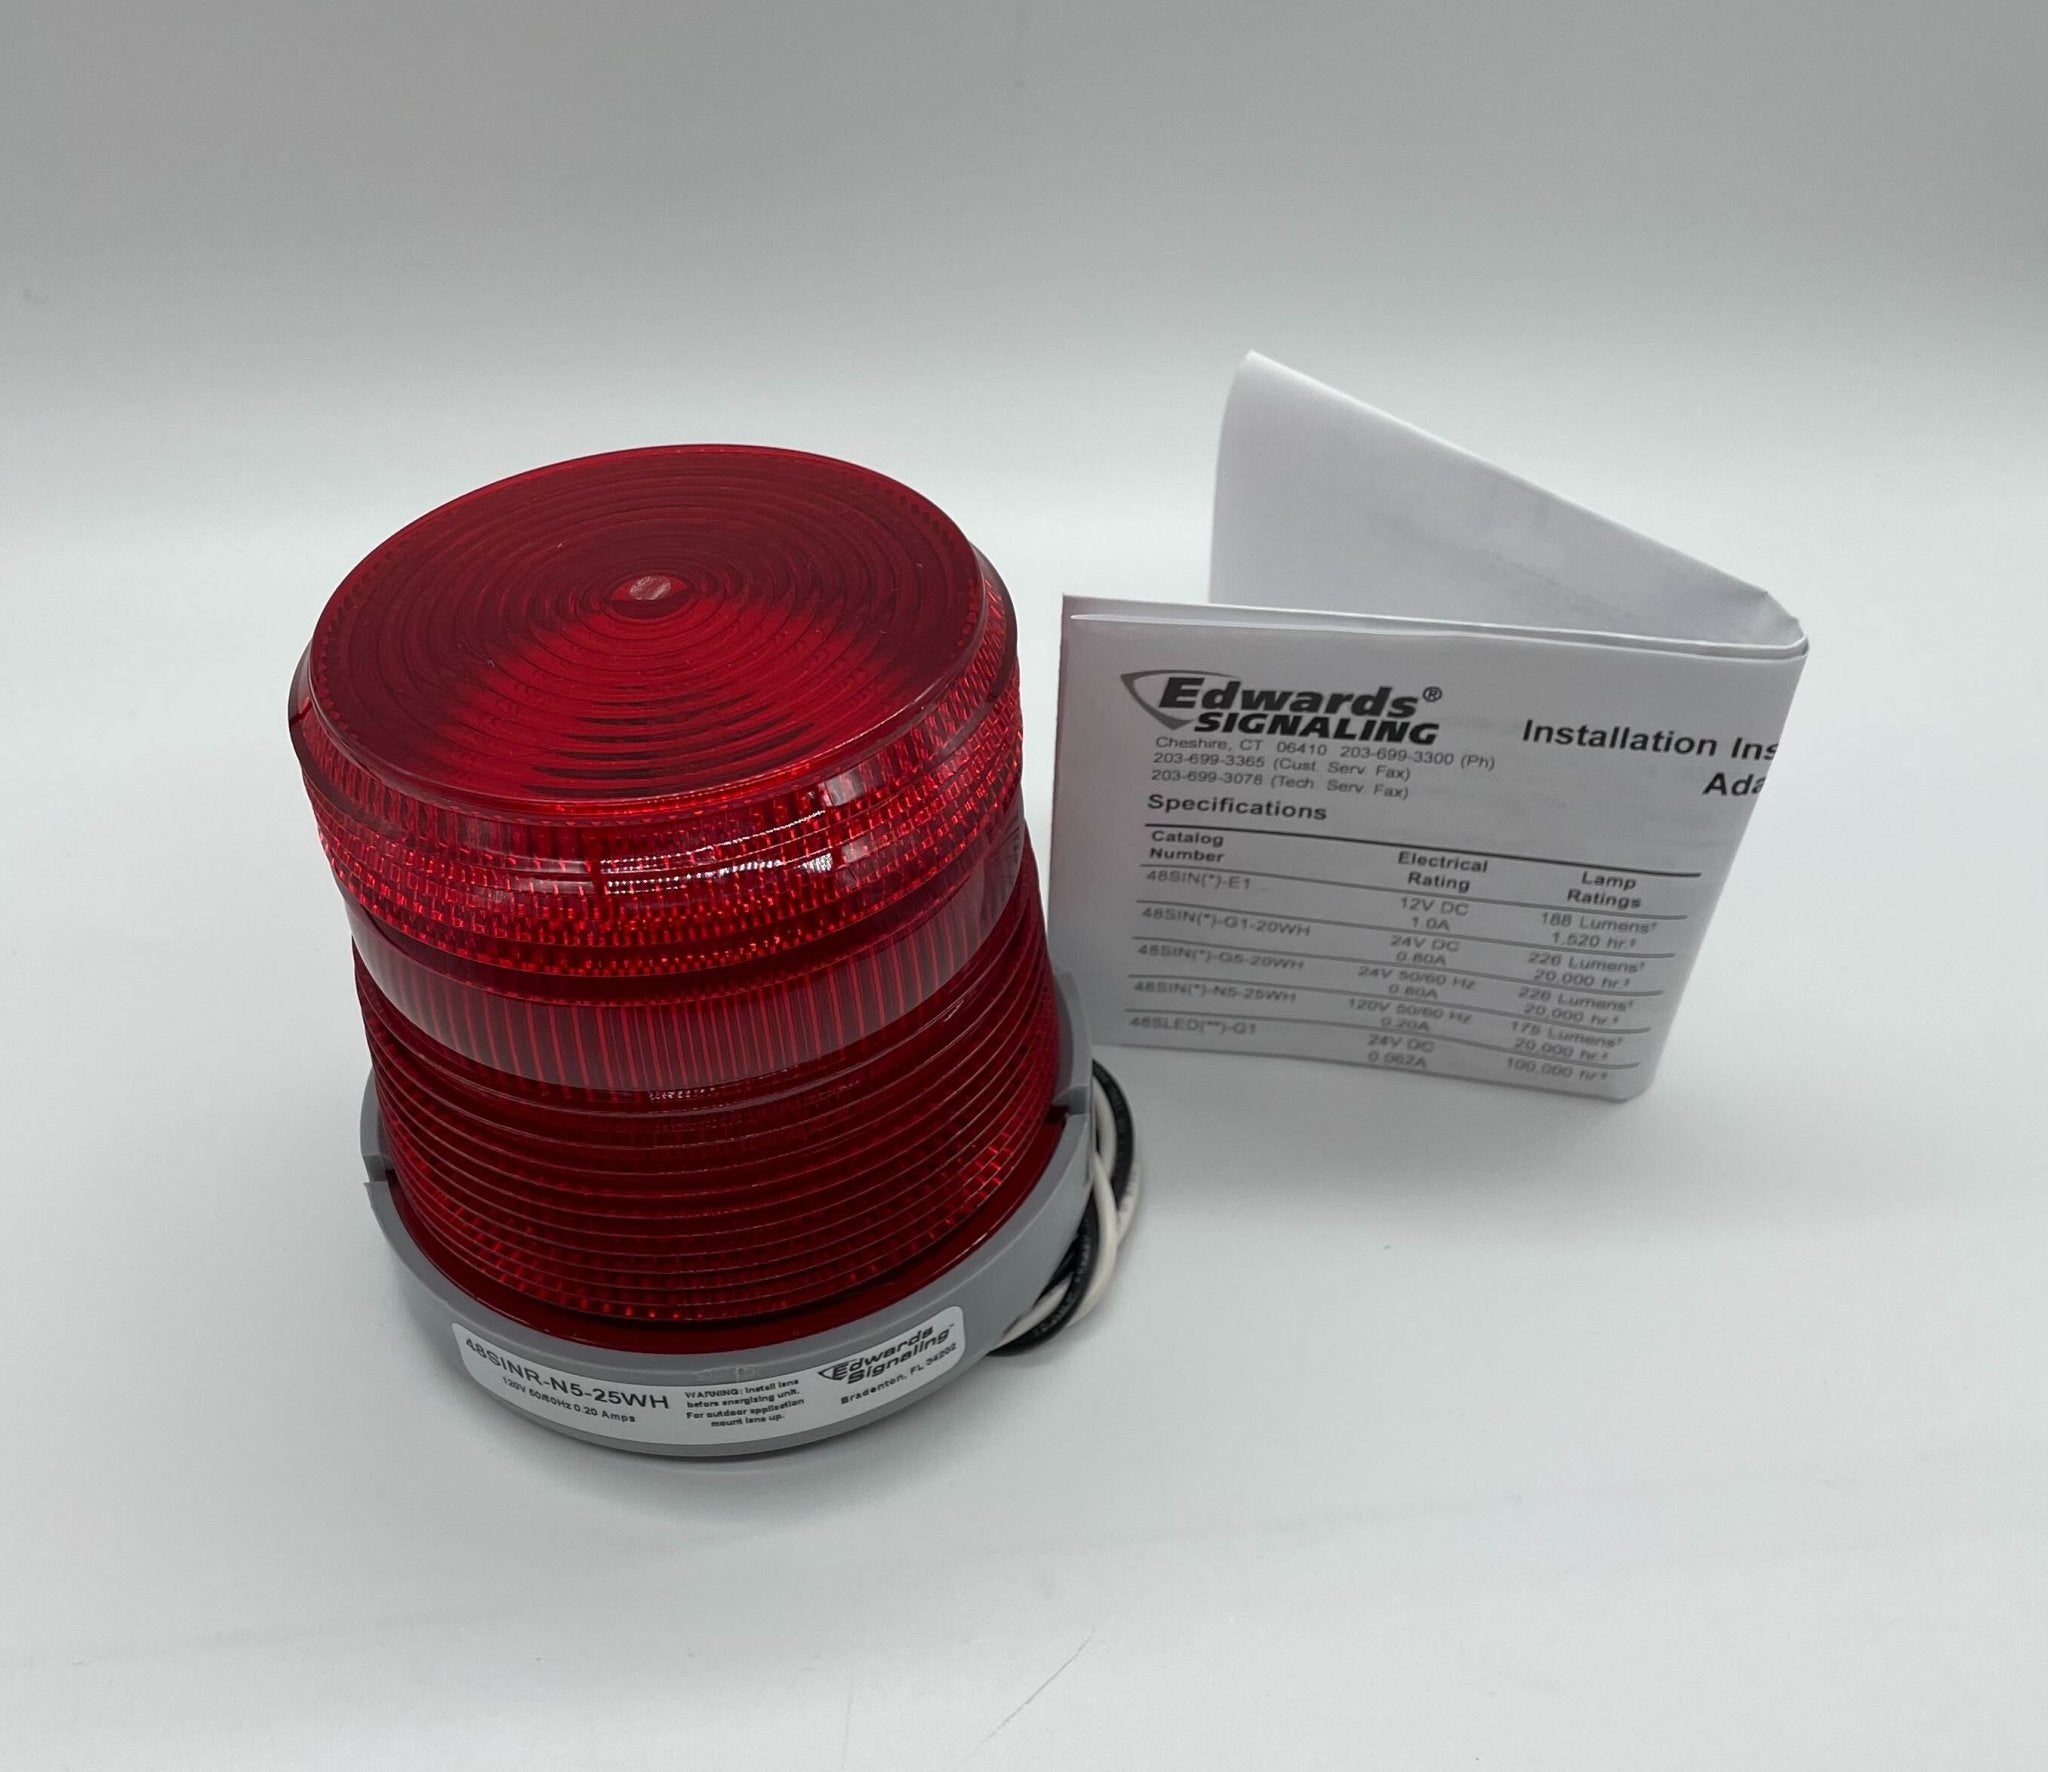 Edwards 48SINR-N5-25WH - The Fire Alarm Supplier